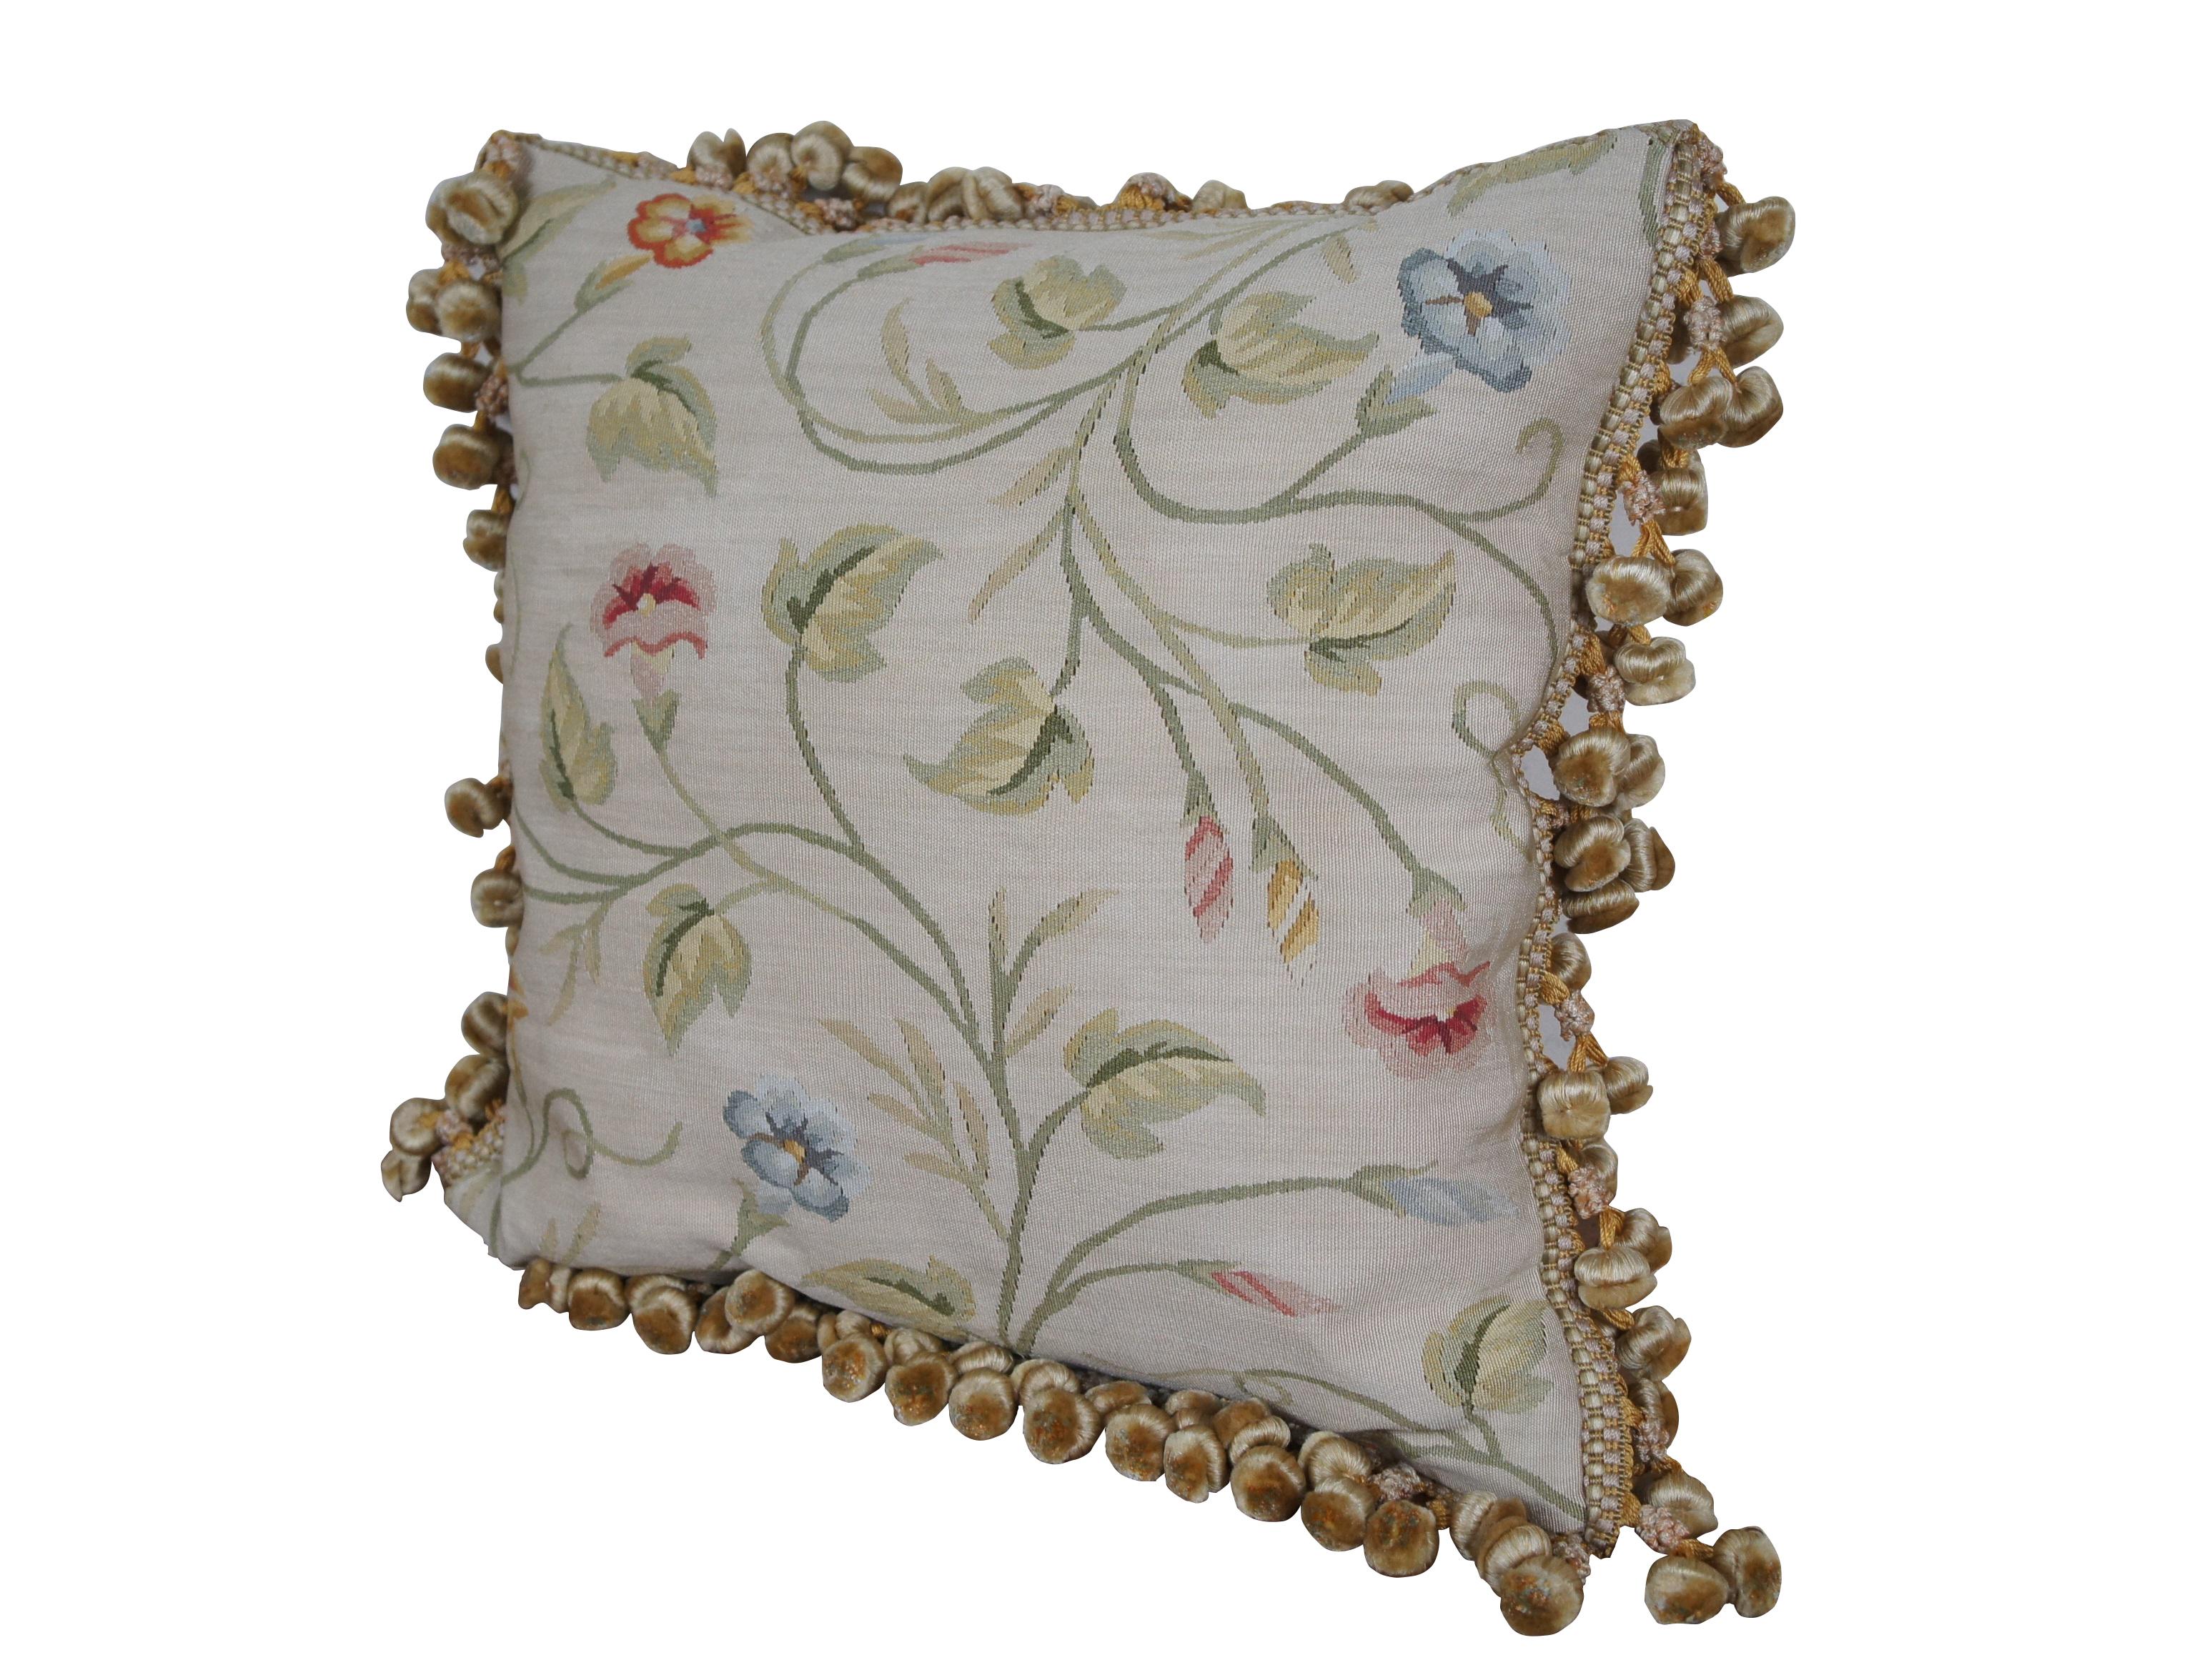 2 Available - 20th century square throw pillow, embroidered in silk with twisting green leafy stems sporting pink, blue, and orange morning glories. Cream and gold ball tassel trim. Beige velour back with zipper closure. Down filled.